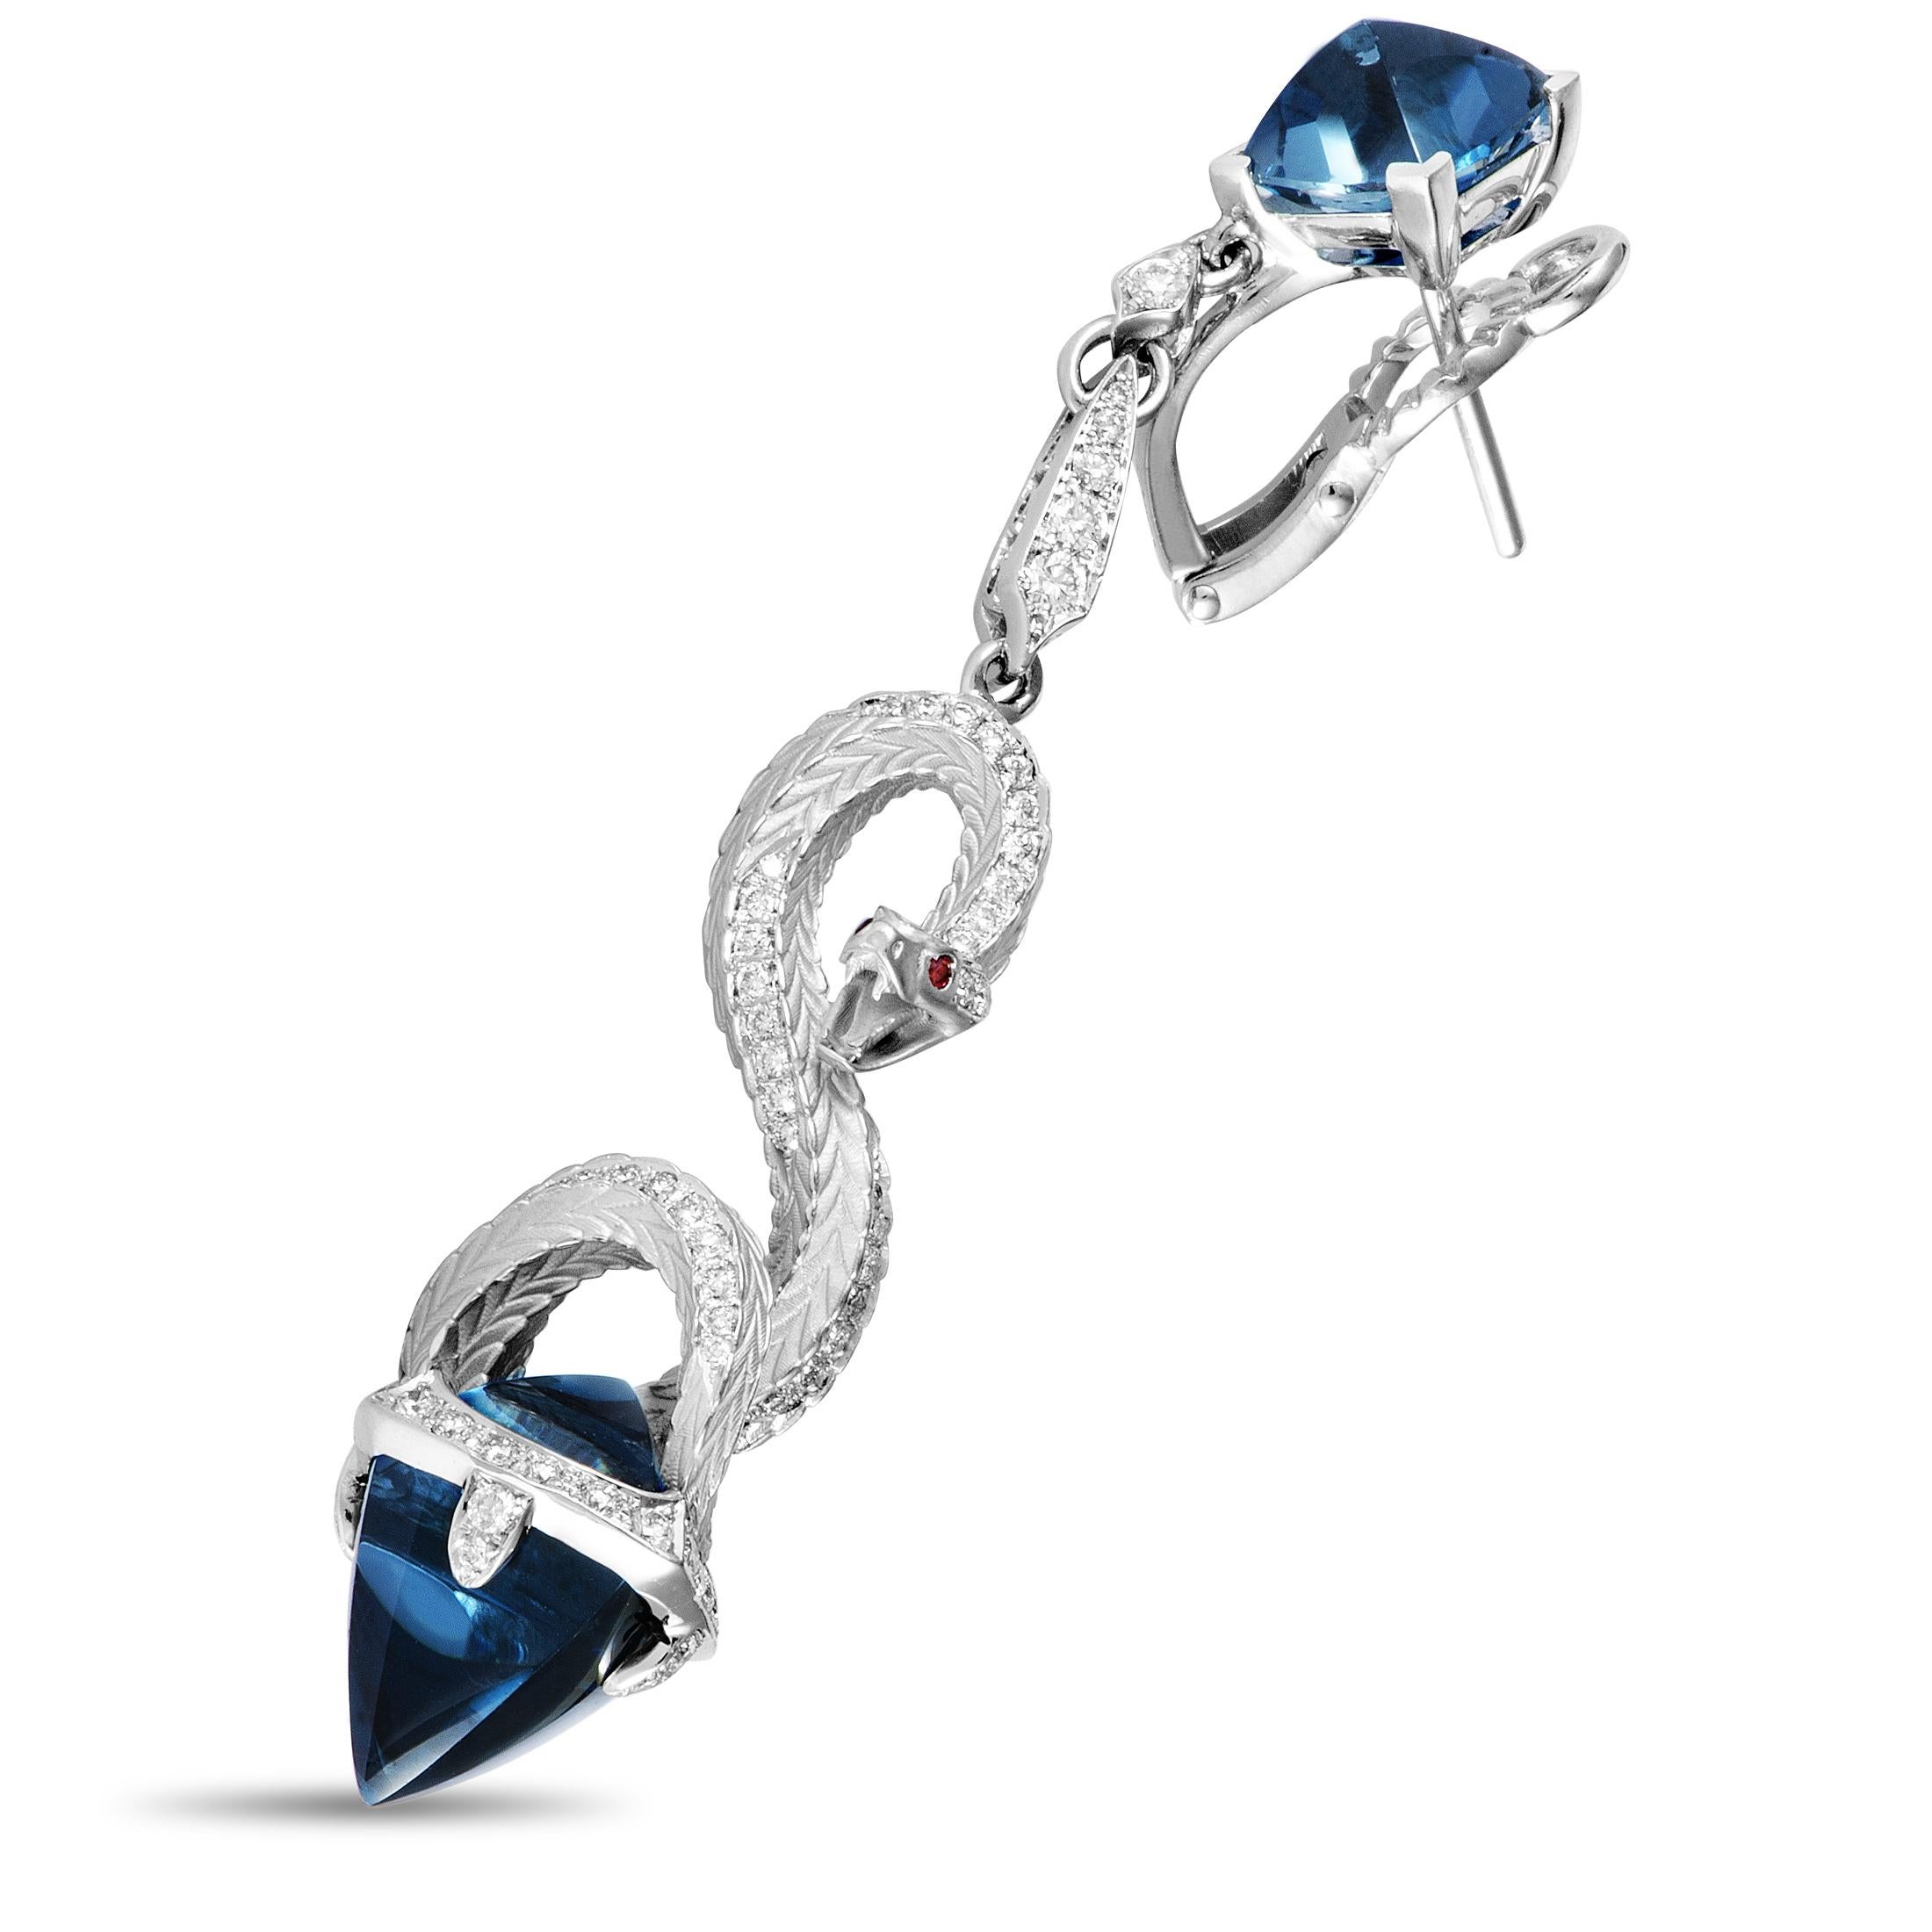 The elegant sheen of 18K white gold is brought out magnificently by the stunning London topaz in these exquisite Magerit earrings from the fascinating “Mythology” collection. The earrings are also decorated with scintillating diamonds and striking